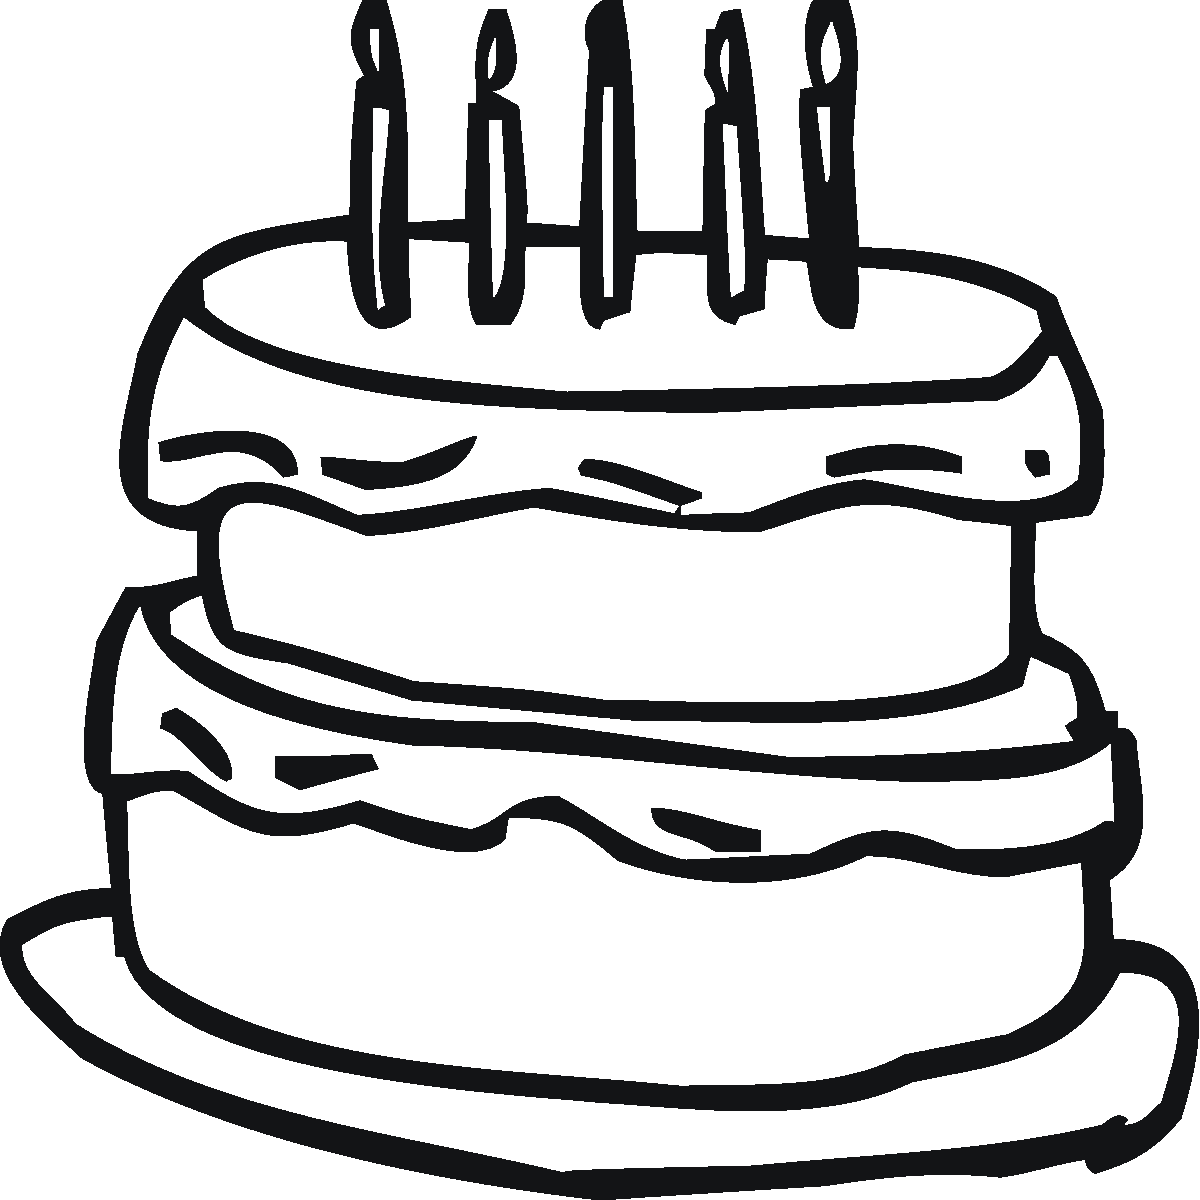 coloring page of a birthday cake birthday cake coloring pages birthday cake cake page birthday coloring a of 